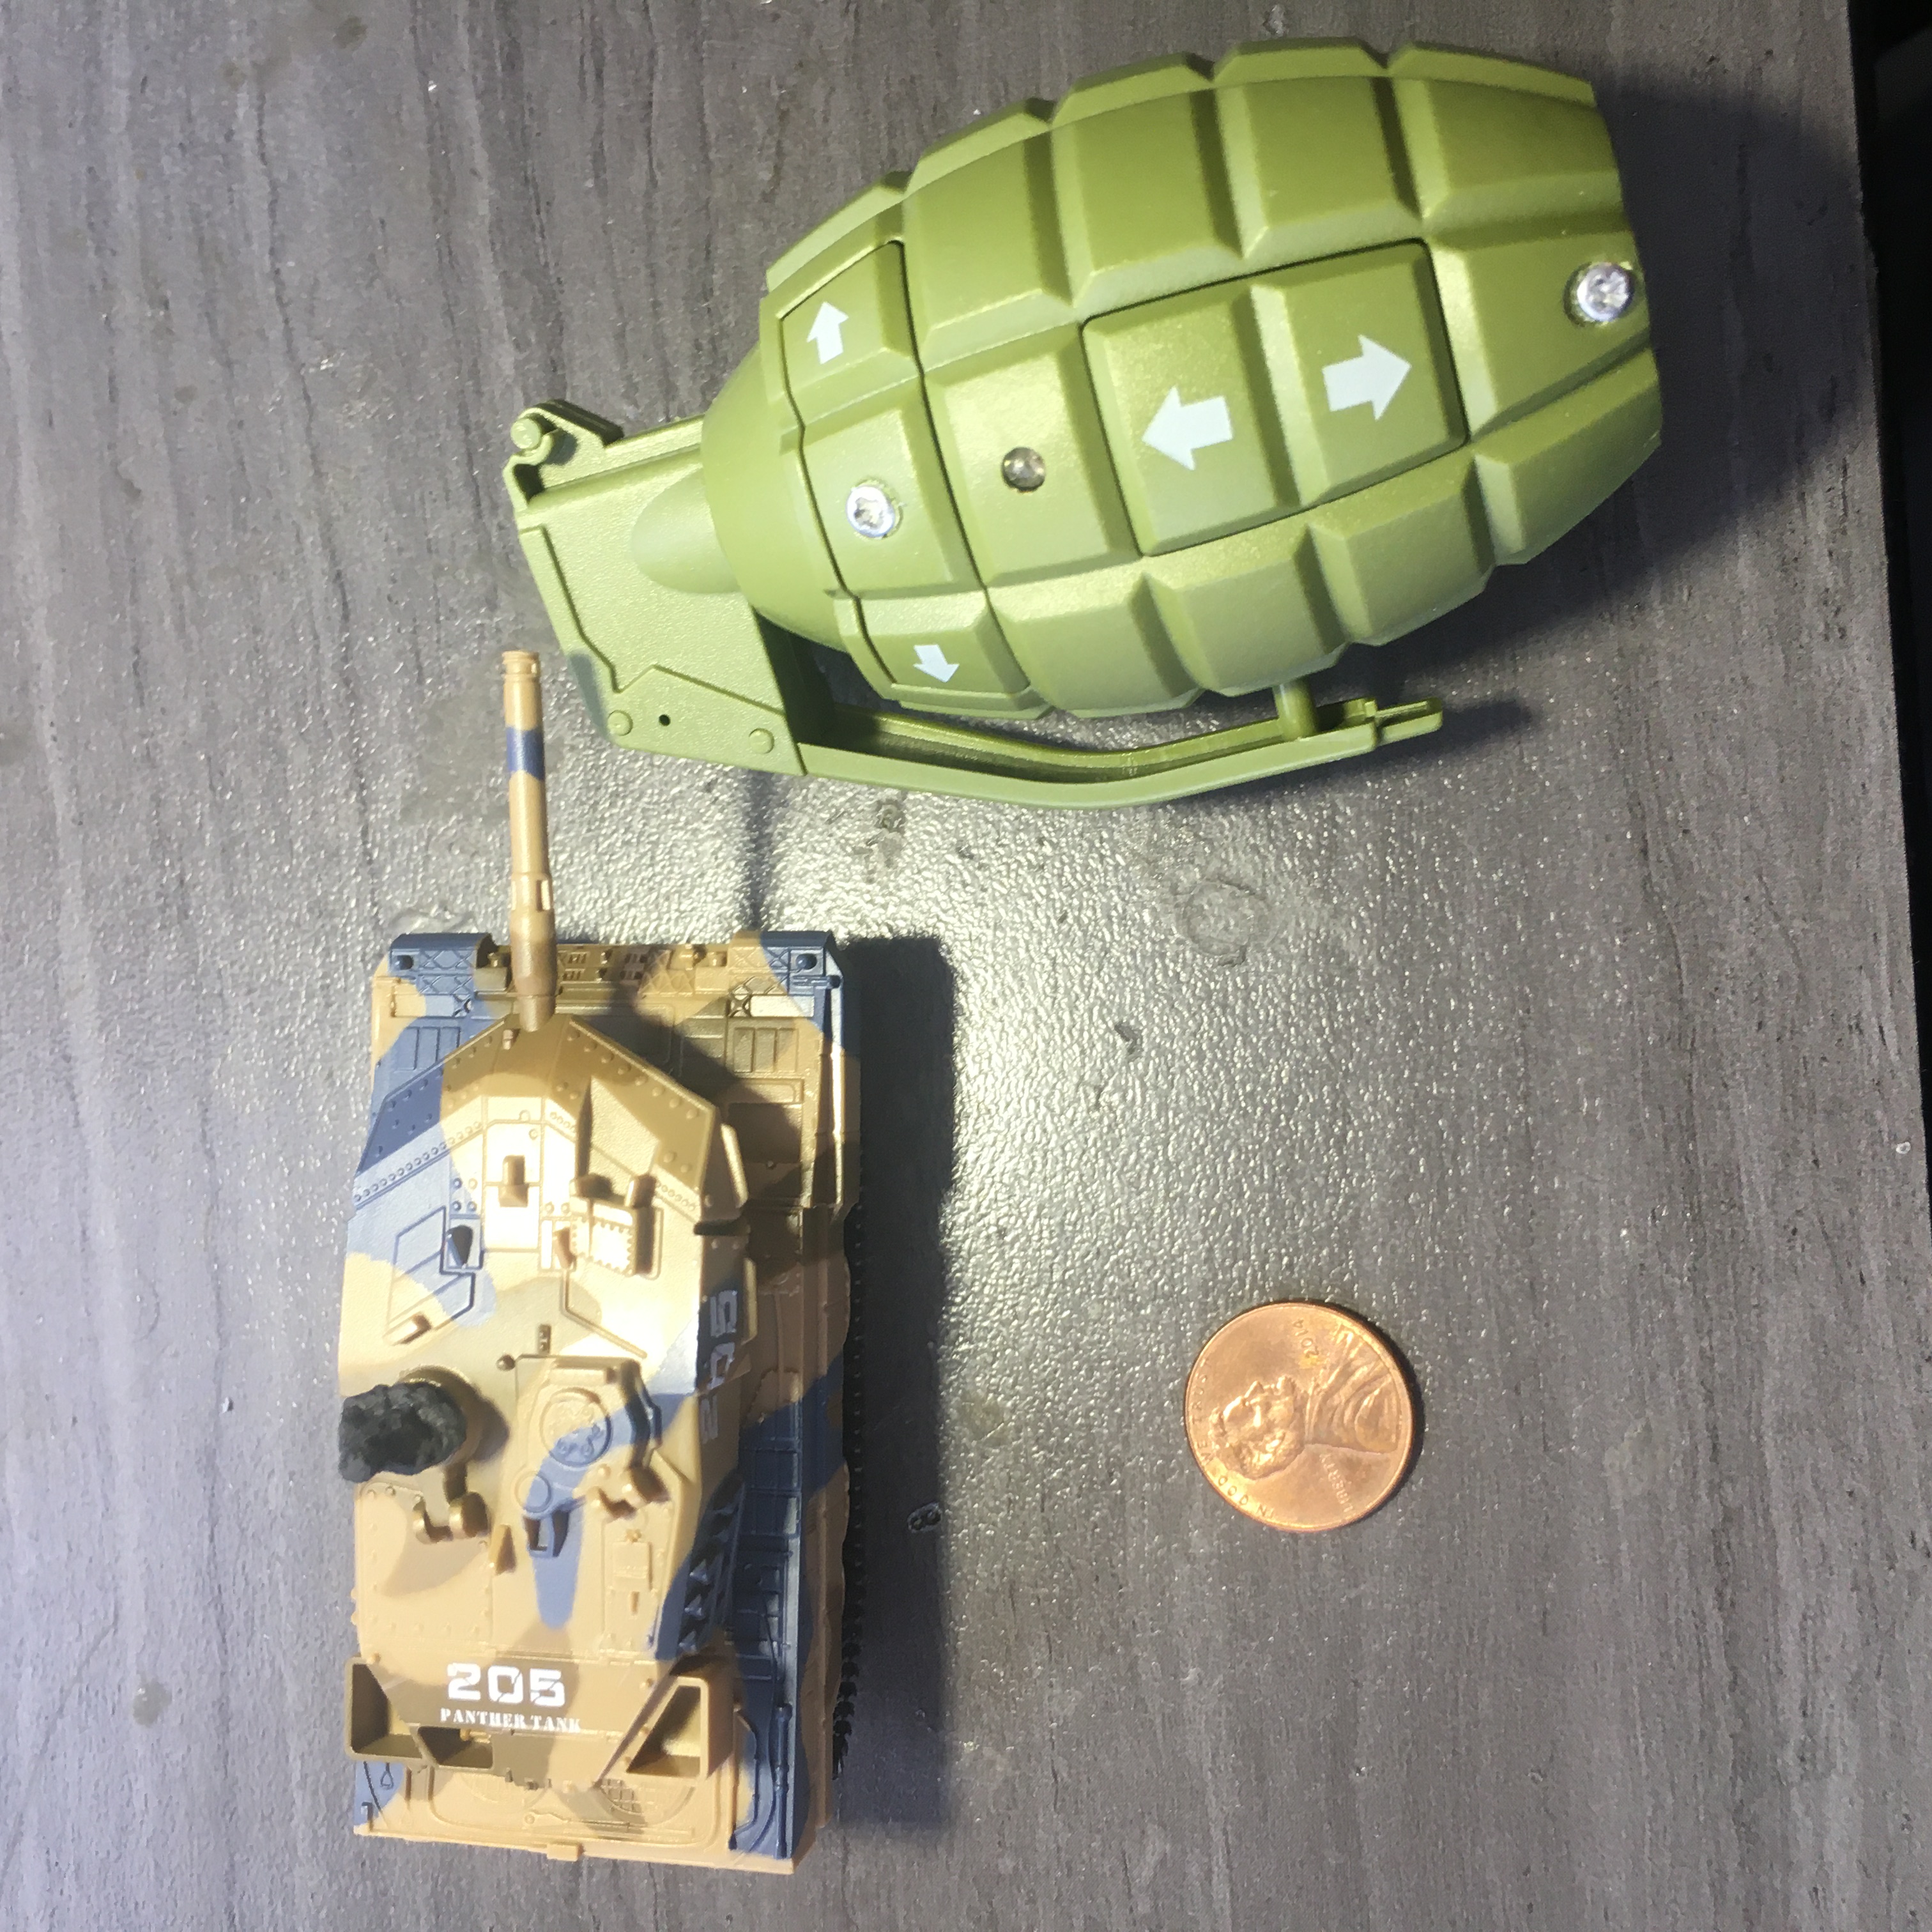 Here is the Leopard with its original 2.4G Handgrenade controller.